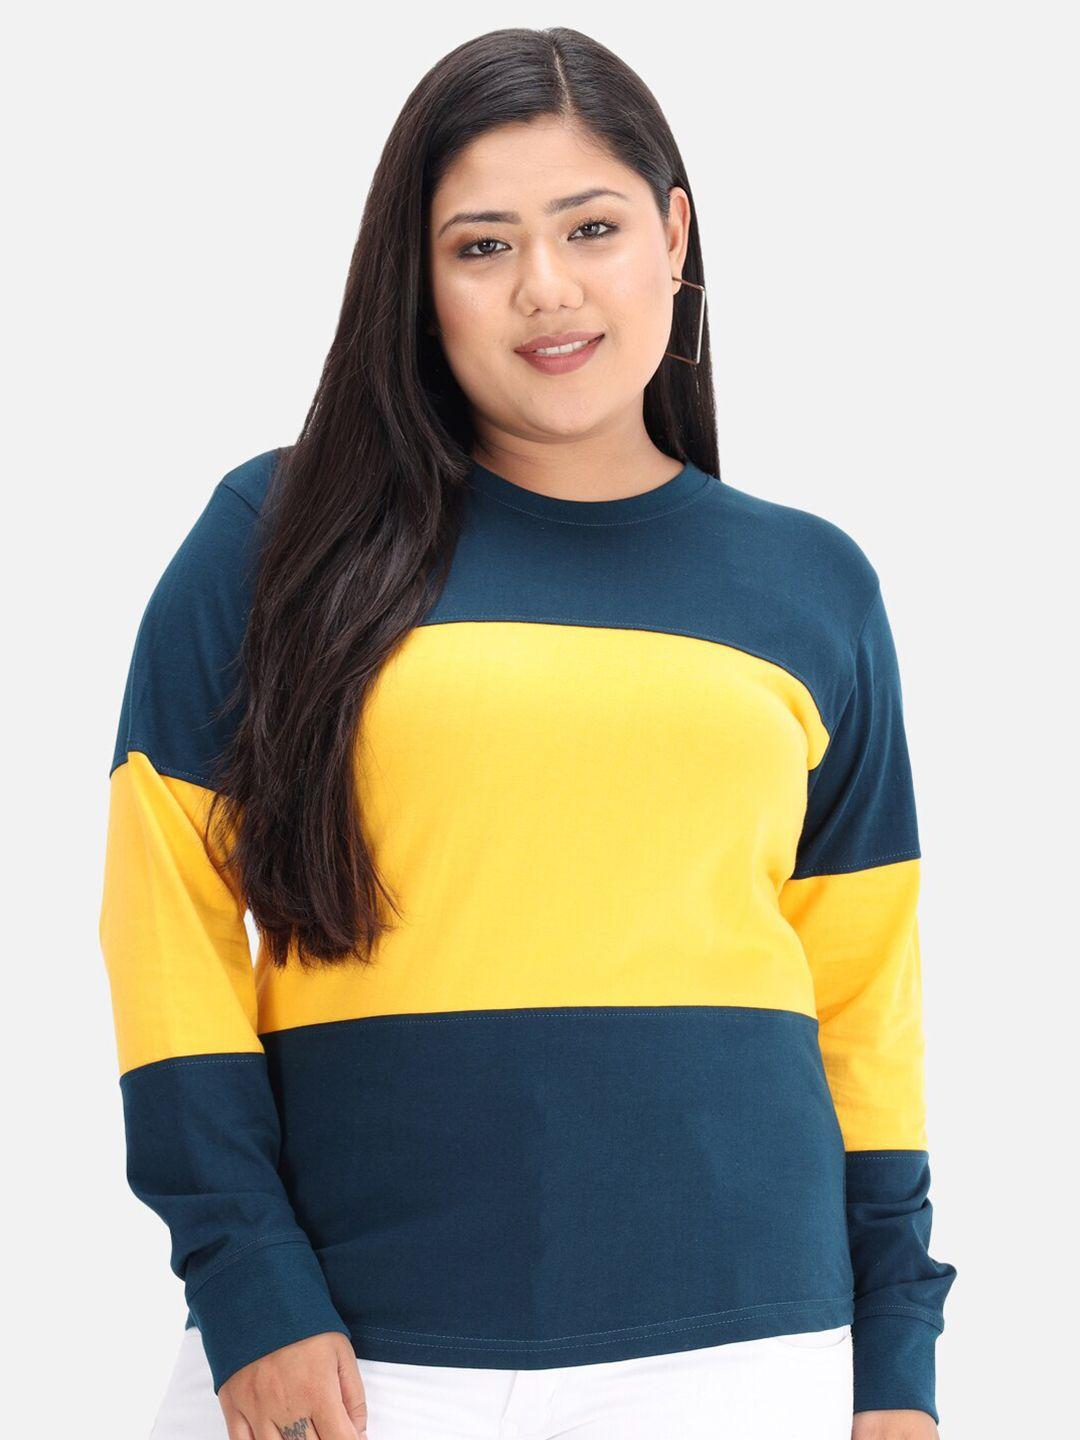 beyound size - the dry state women teal blue & yellow colourblocked t-shirt